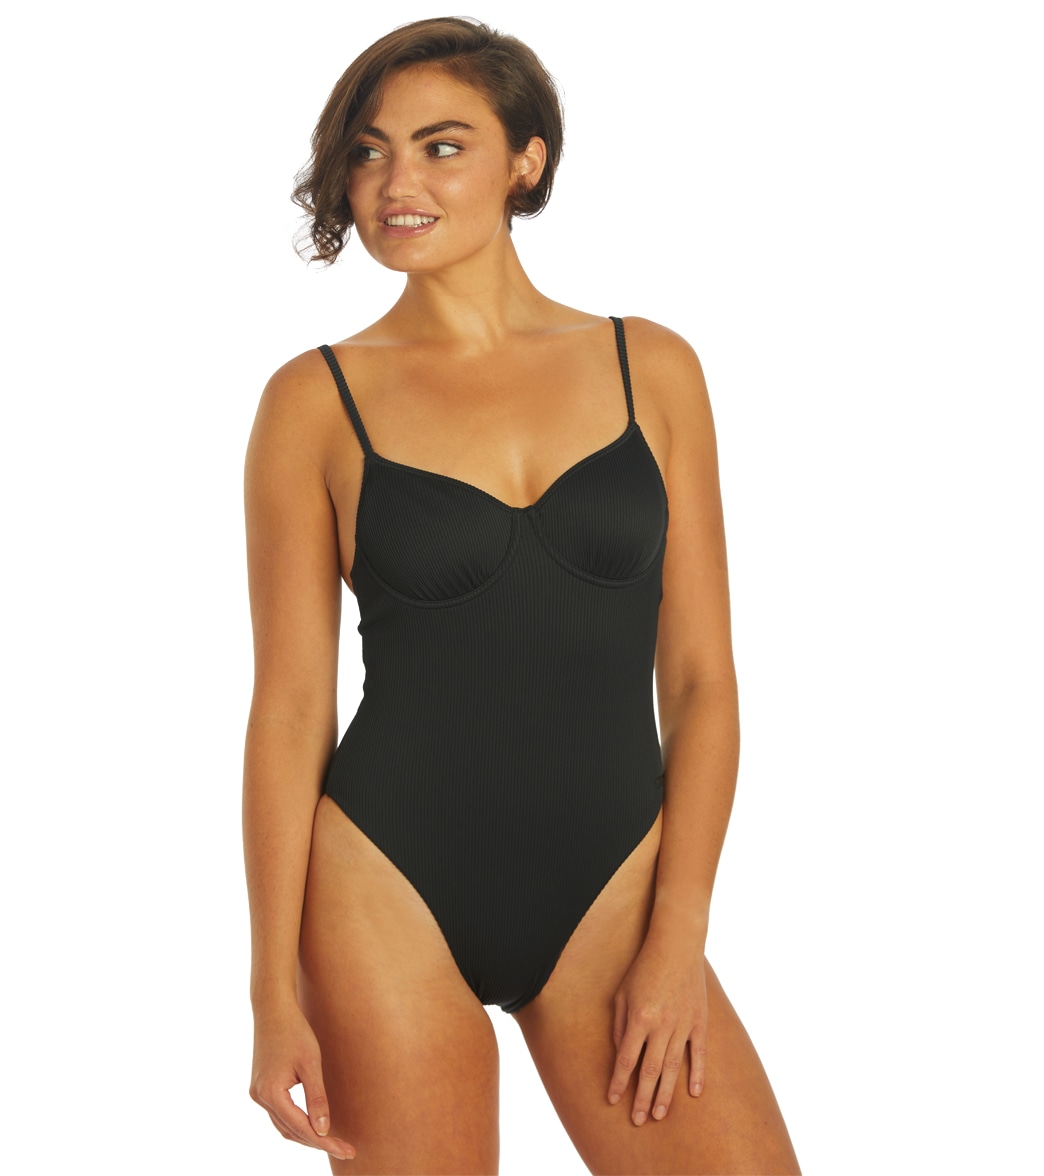 Roxy Women's Rib Love The Muse One Piece Swim Suit - Anthracite Large - Swimoutlet.com